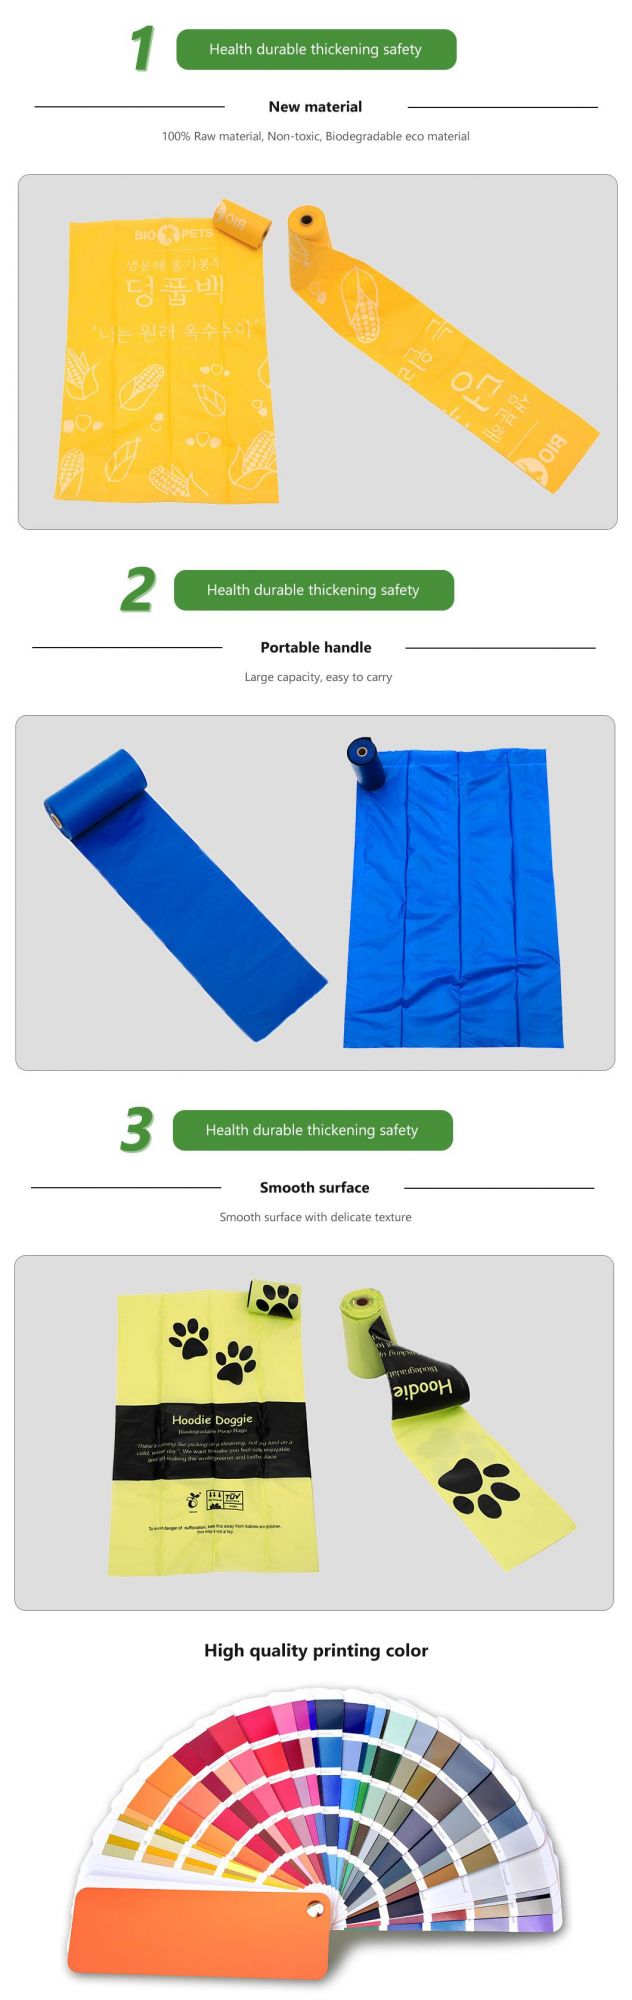 Custom Cornstarch Based Scented Eco Friendly Compostable Biodegradable Dog Poop Bags with Handle